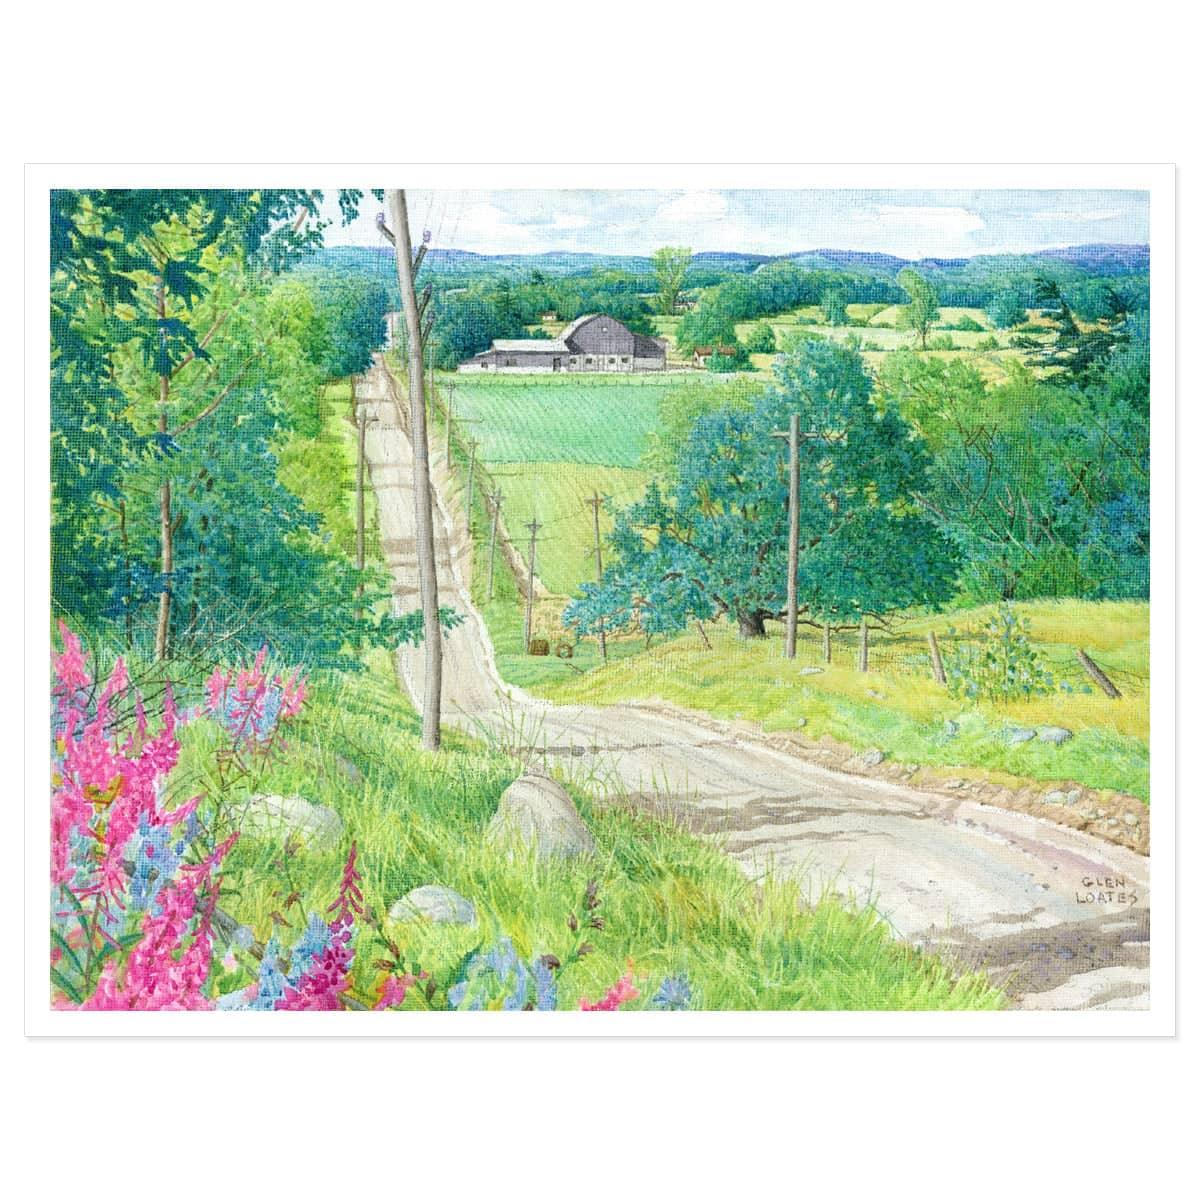 Over the Hills and Far Away - Art Print | Artwork by Glen Loates